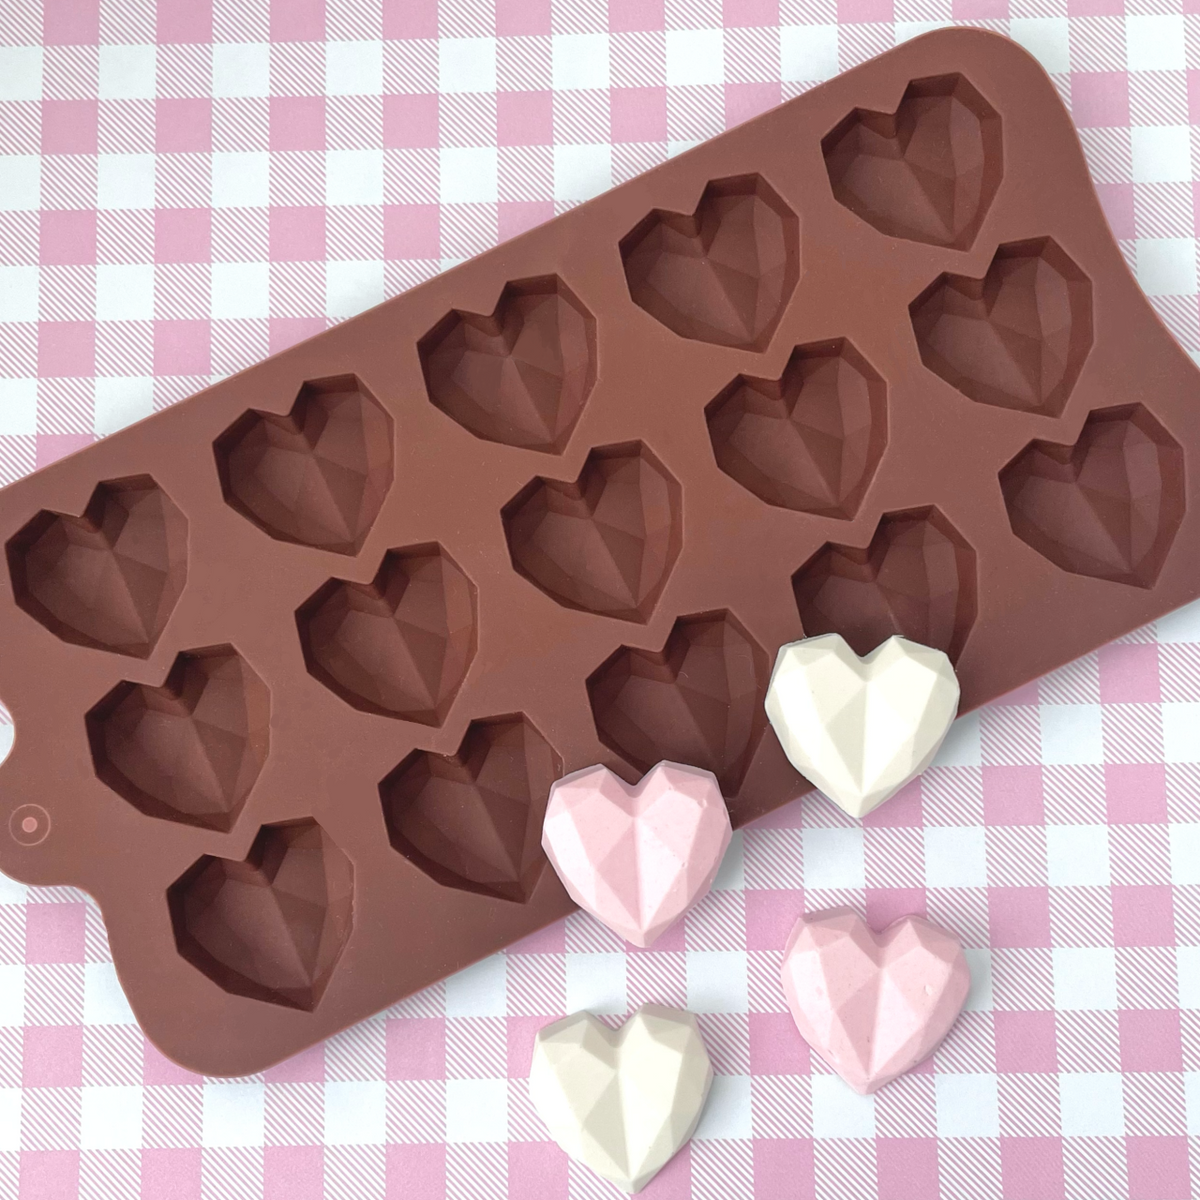 1pc Breakable Heart Mold Set for Chocolate, Heart Silicone Molds